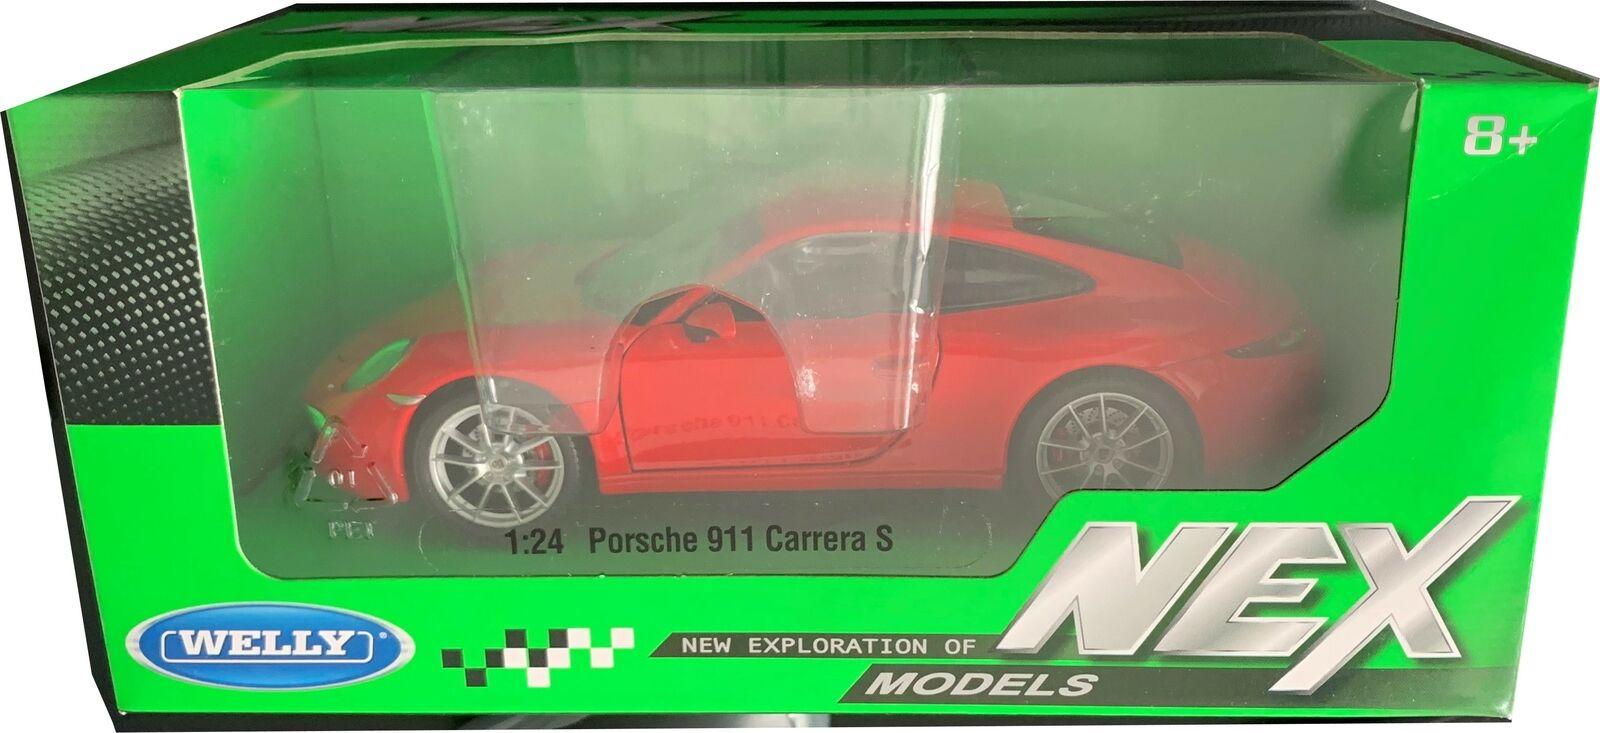 Porsche 911 Carrera S in red 1:24 scale diecast model from Welly